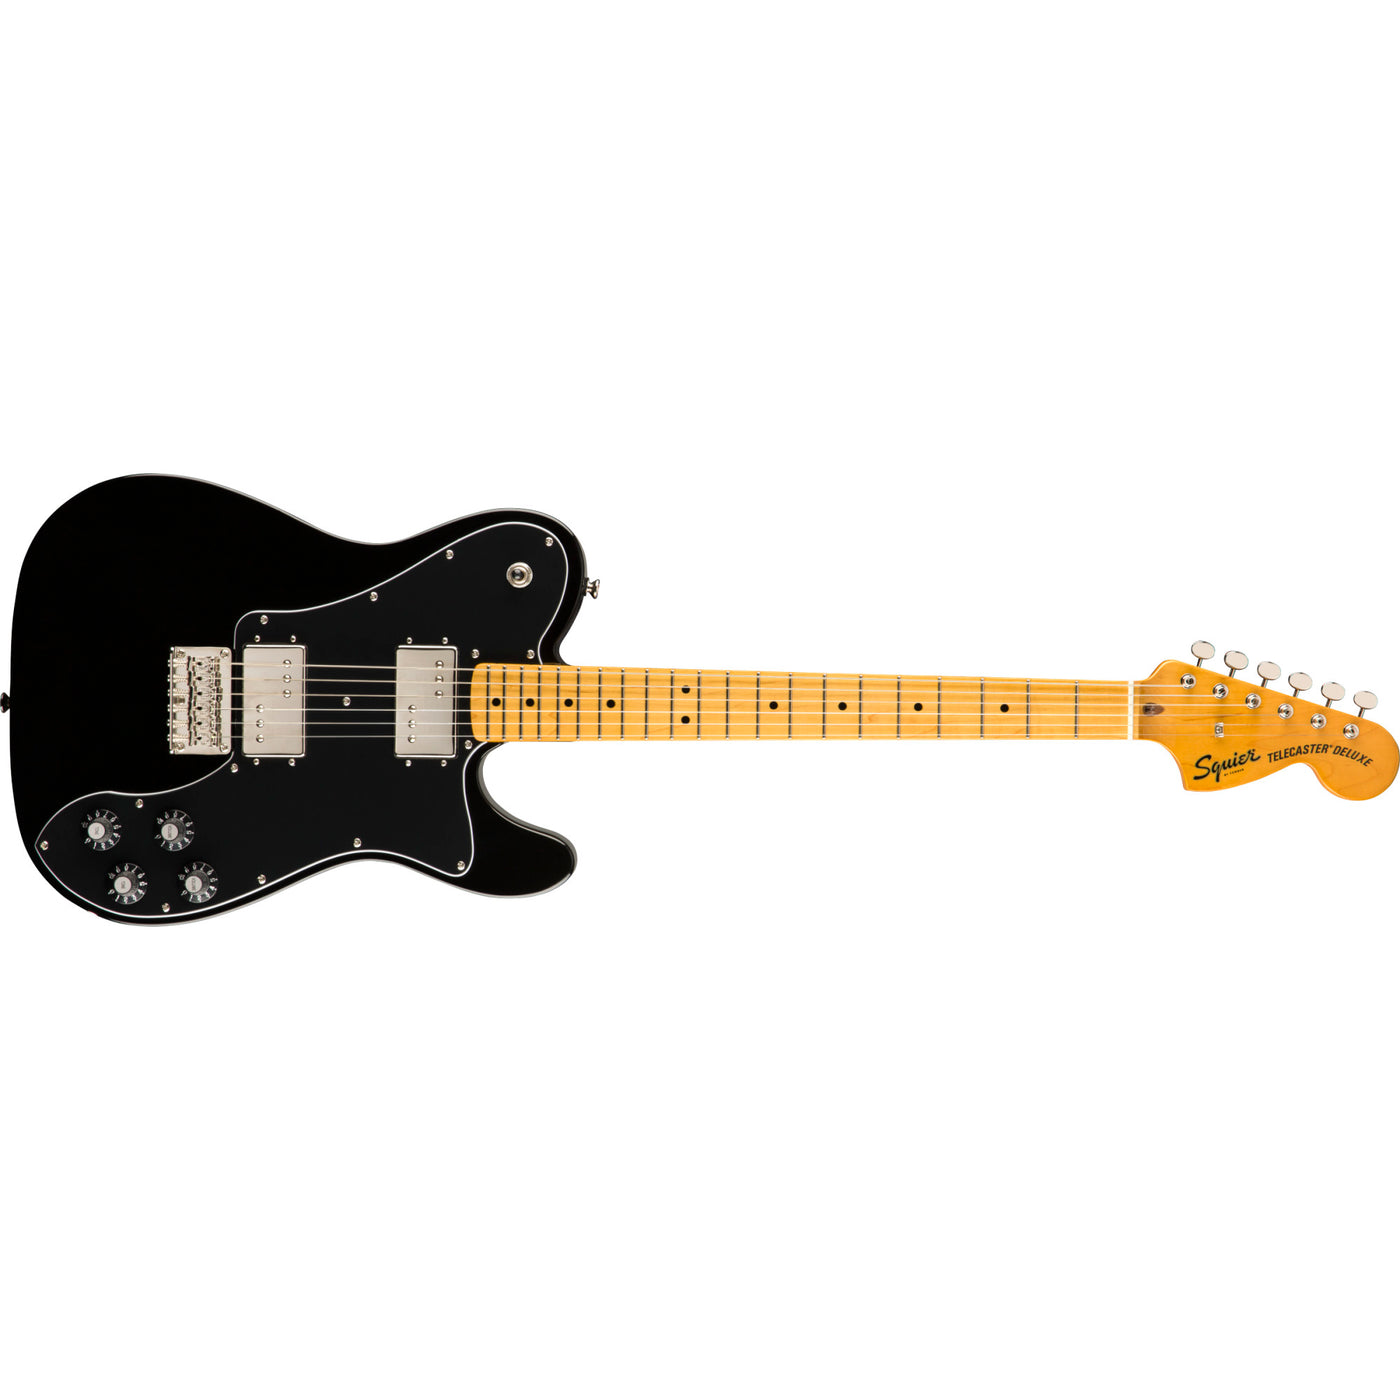 Fender Classic Vibe ‘70s Telecaster Deluxe Electric Guitar, Black (0374060506)